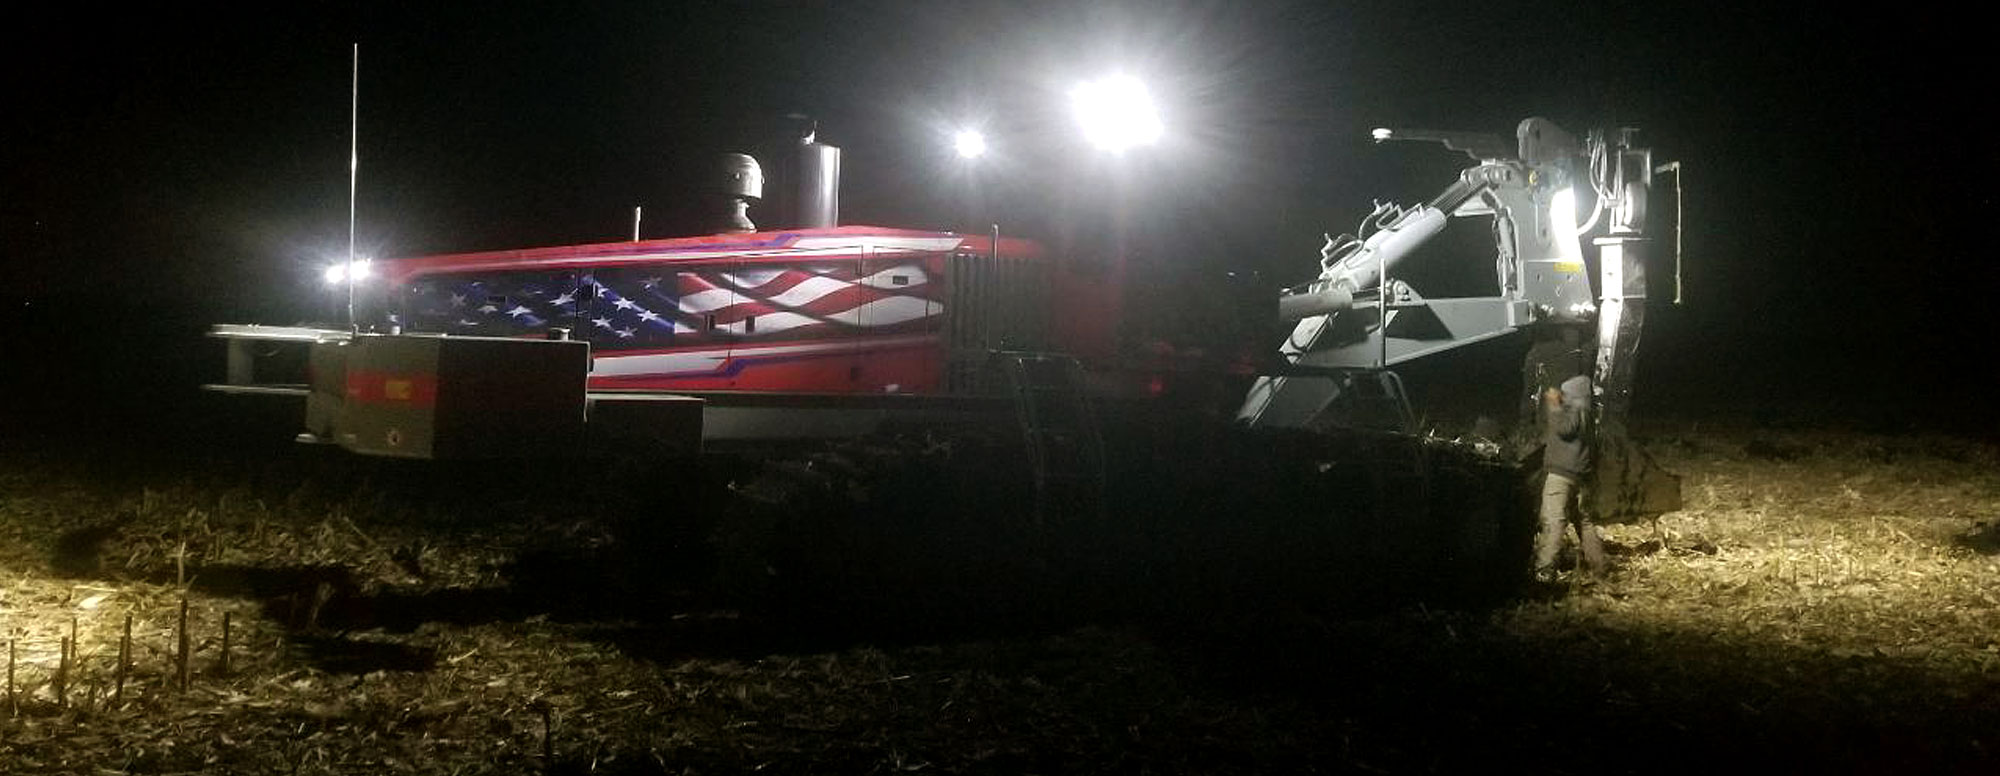 Dahle Enterprises' field tiling machine working in a field at night with its lights on